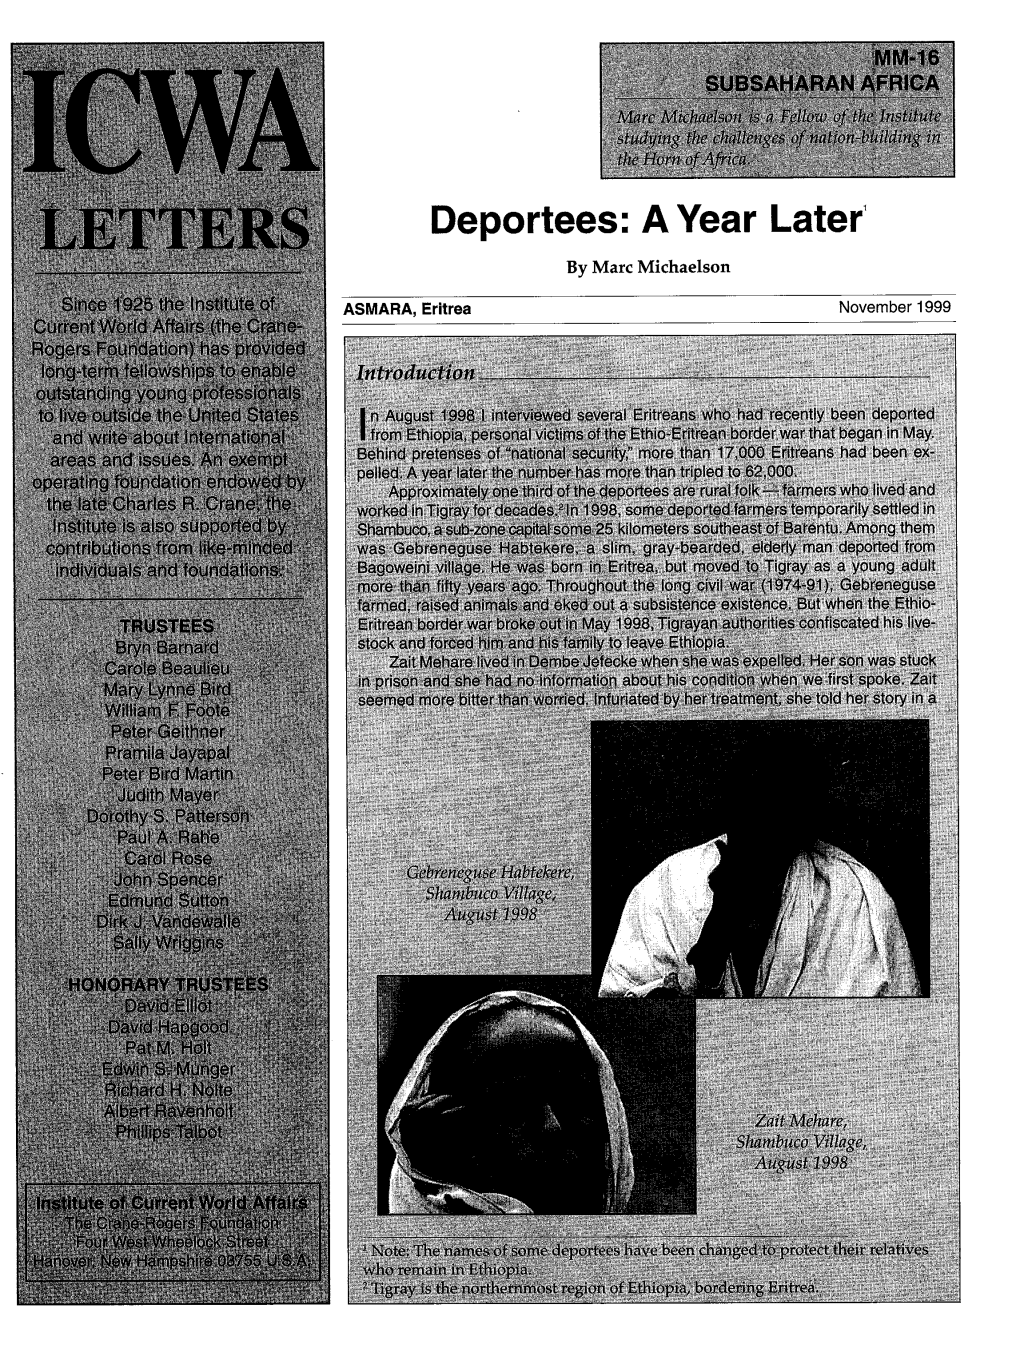 Deportees: a Year Later' by Marc Michaelson